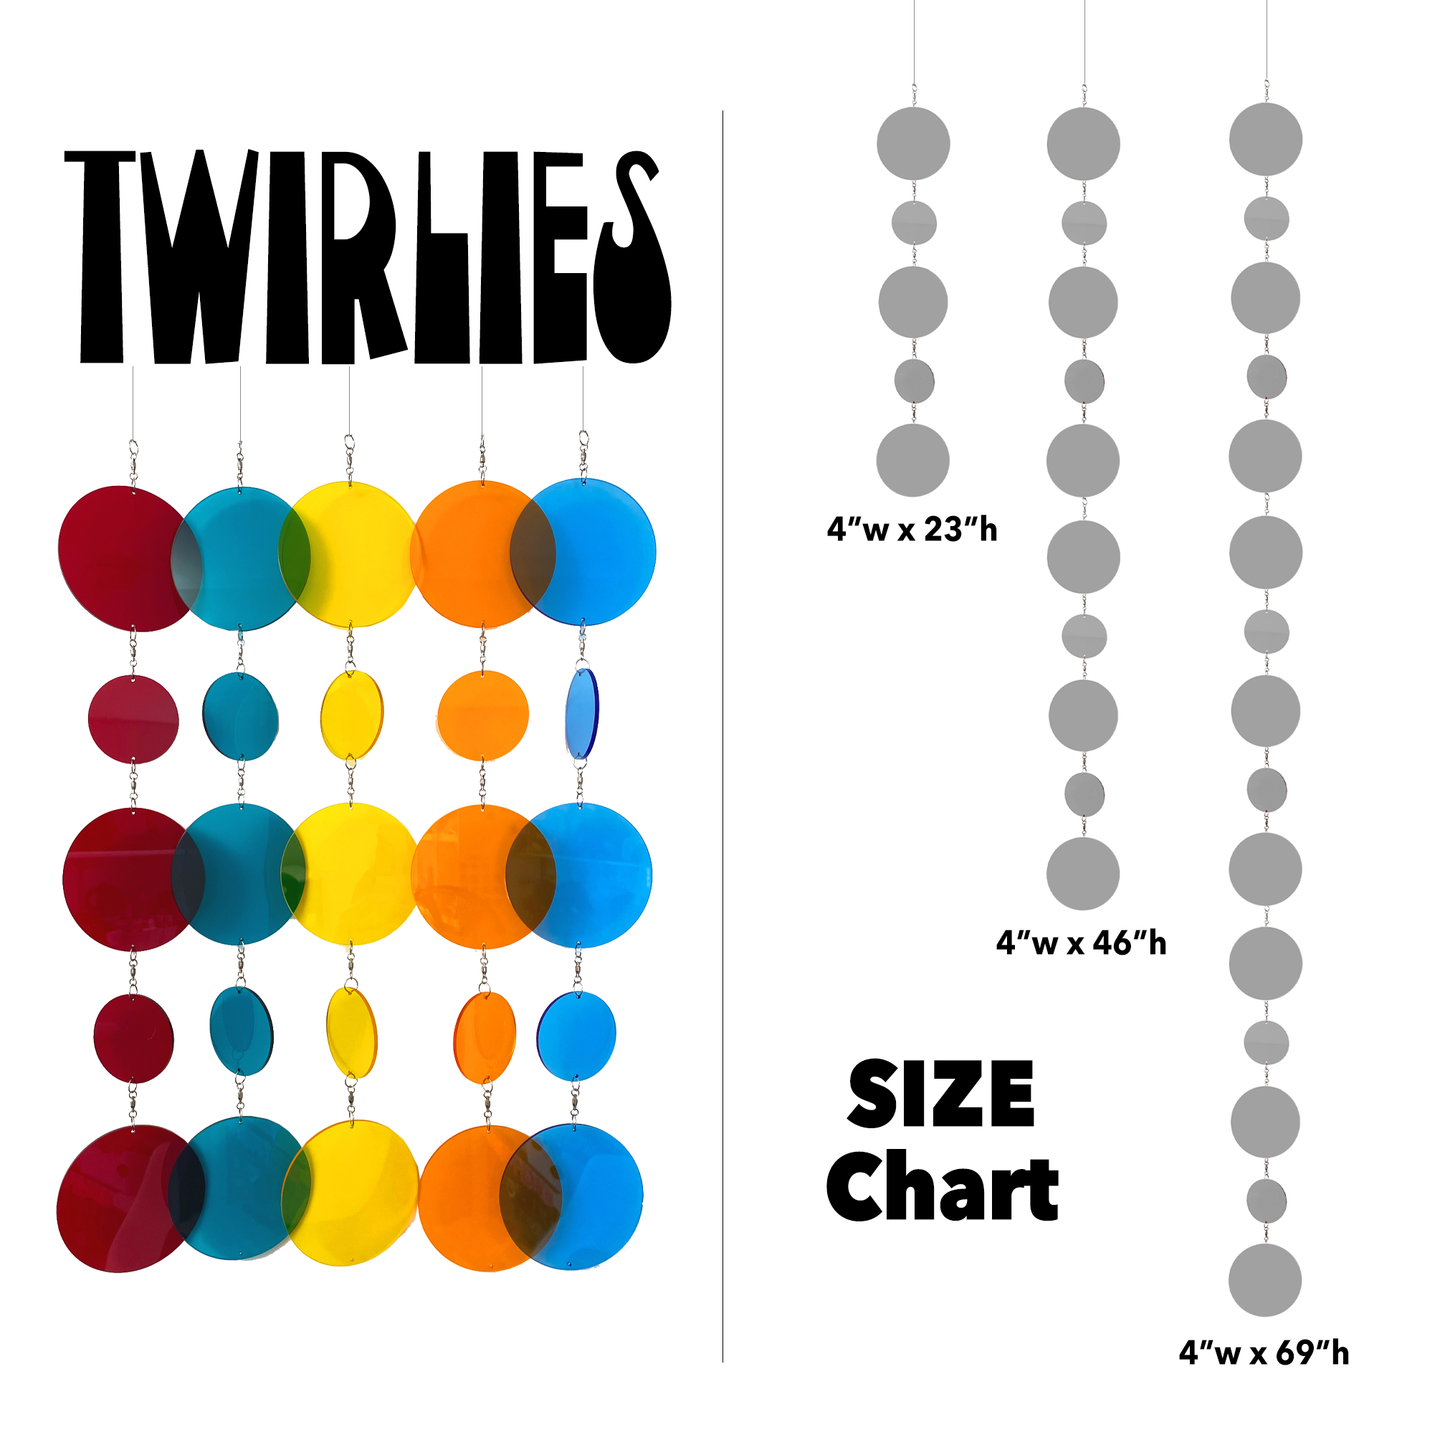 Twirlies Size Chart - fun hanging art mobiles that are circles of color that twirl - by AtomicMobiles.com